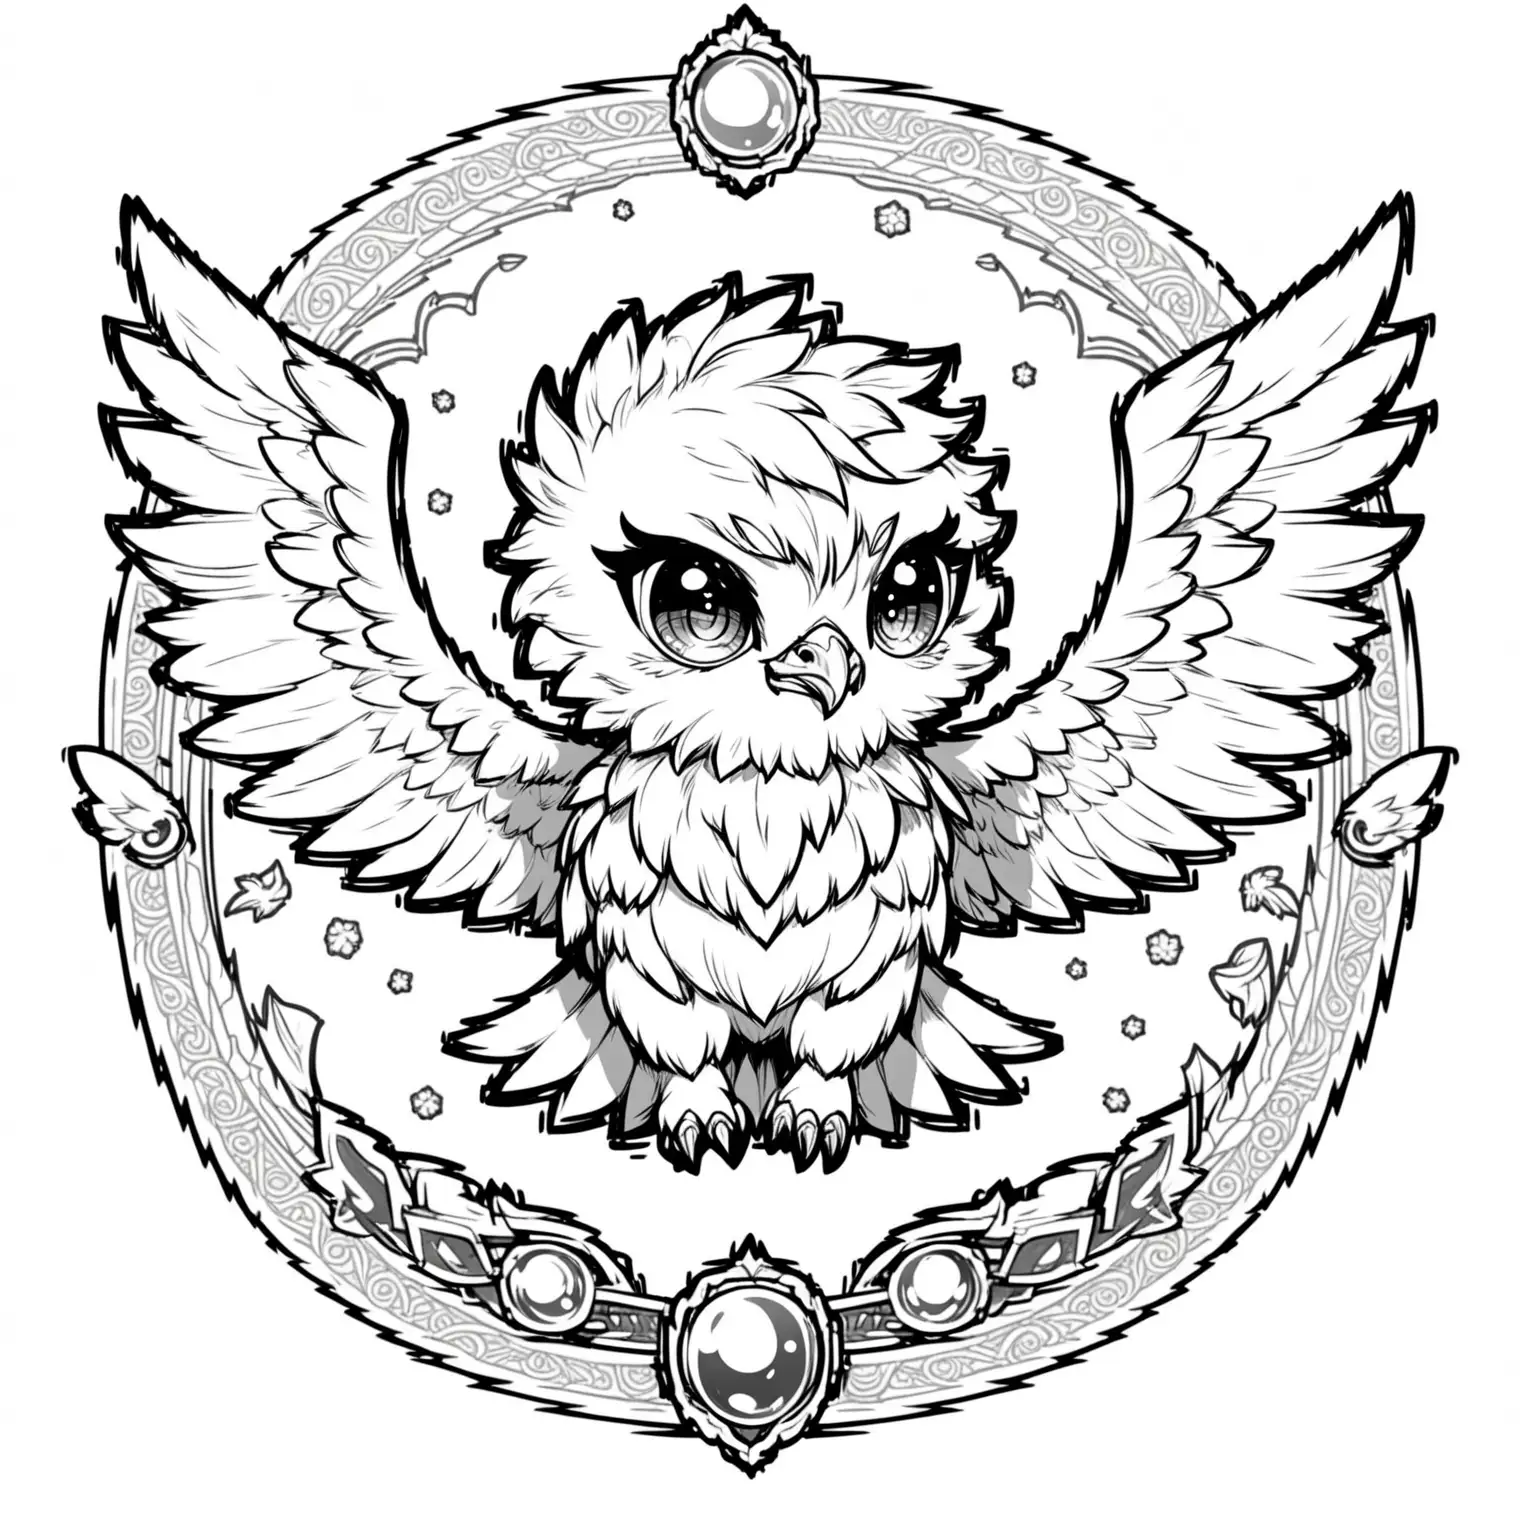 A coloring page depicting a detailed, black and white drawing of a chibi, mythological, baby griffon isolated on a white background